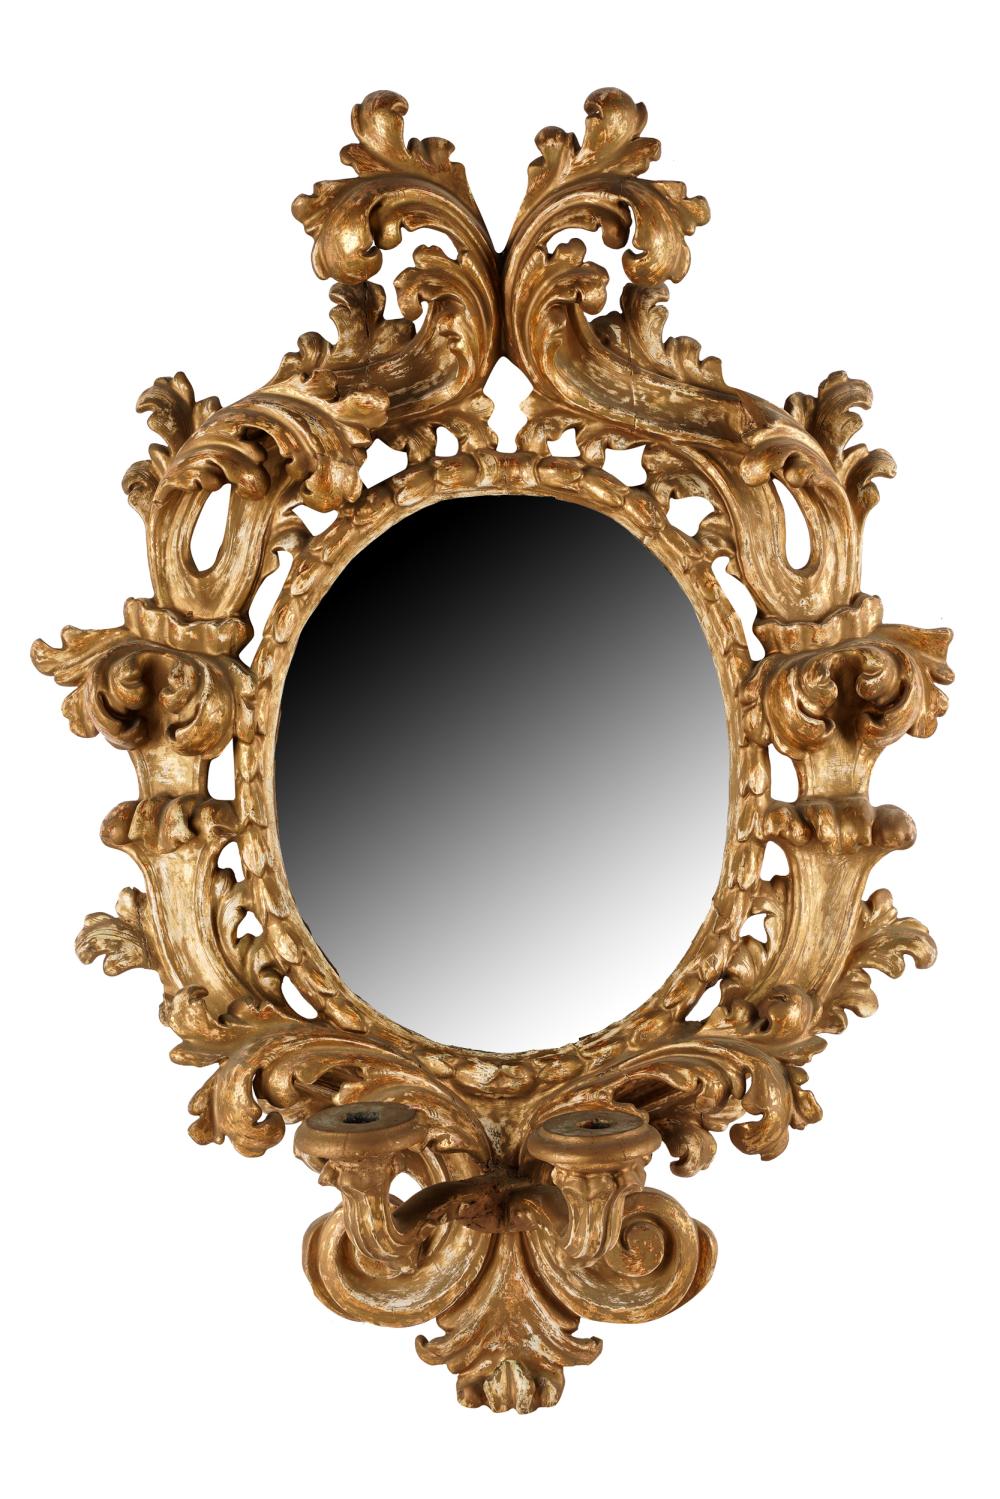 ROCOCO STYLE GILT MIRRORwith parcel